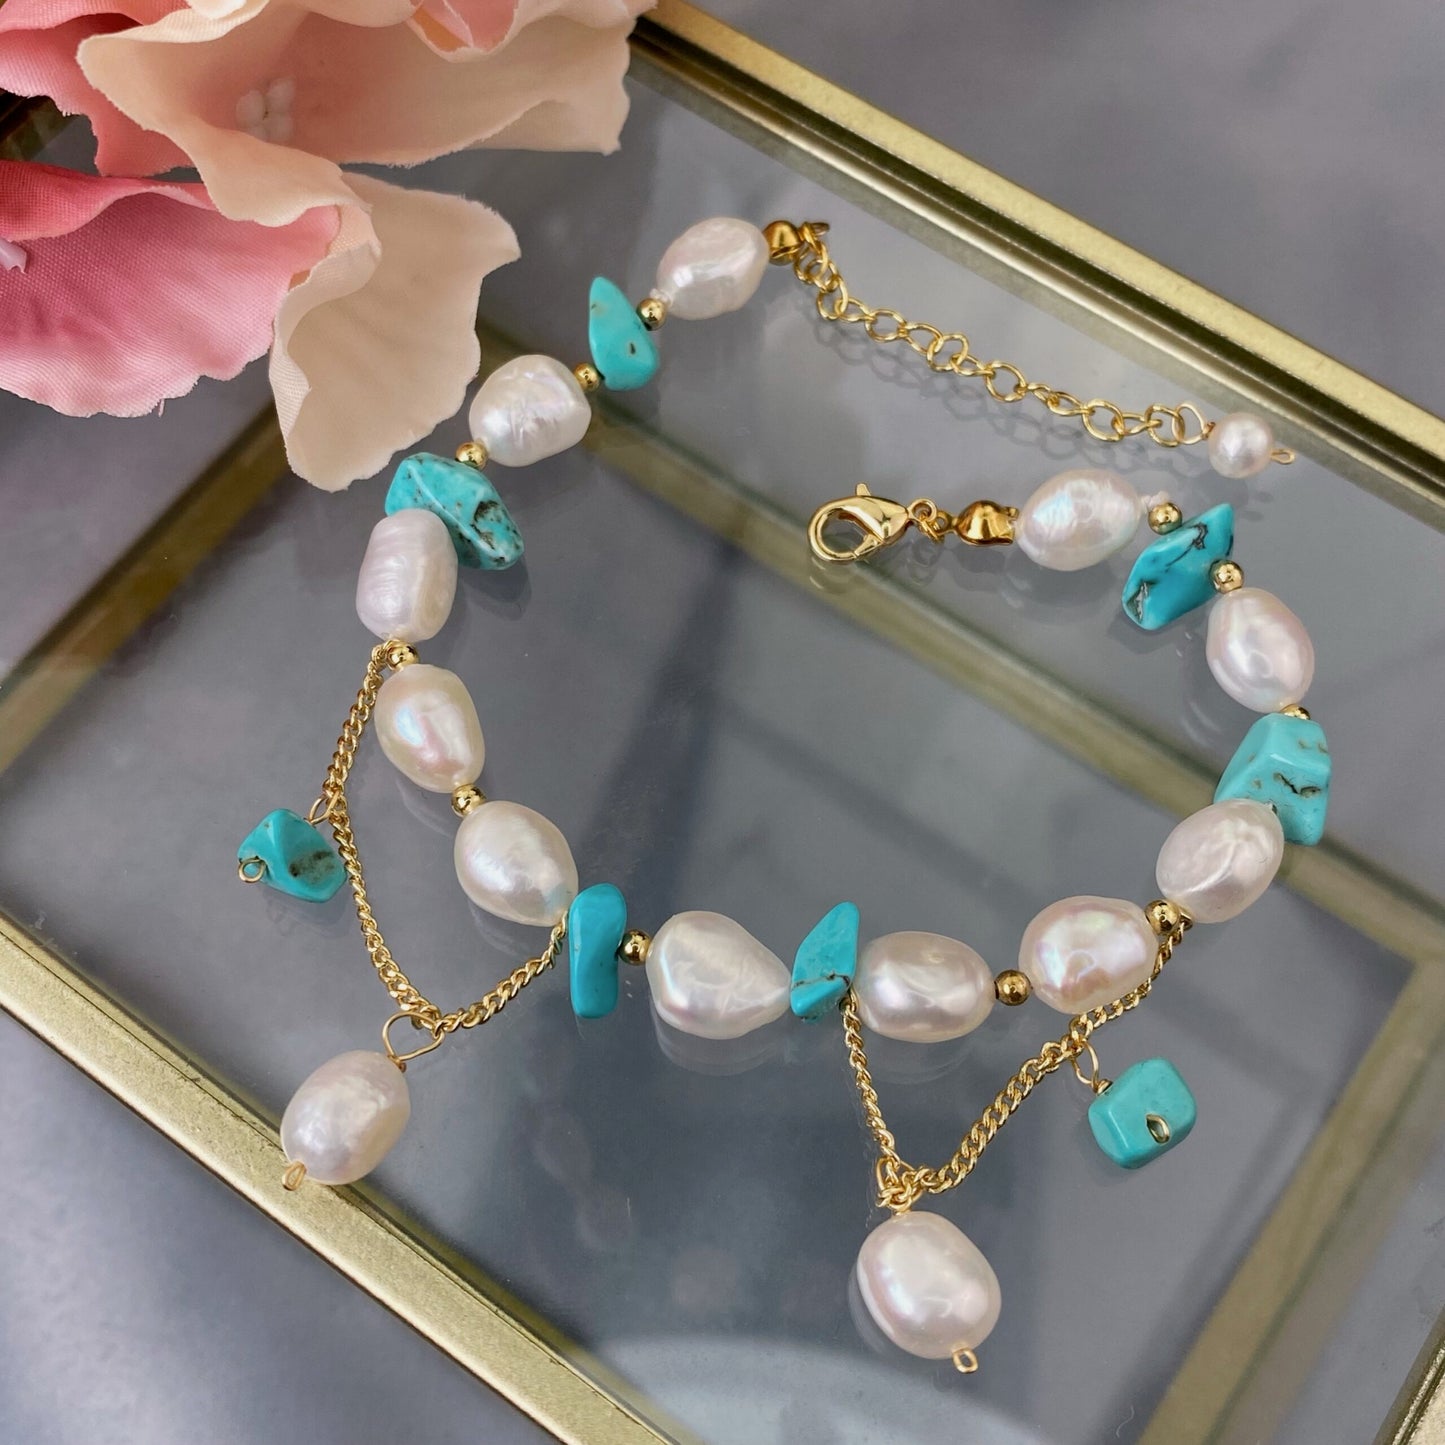 River Pearl Bracelet with Turquoise  (Pressed)